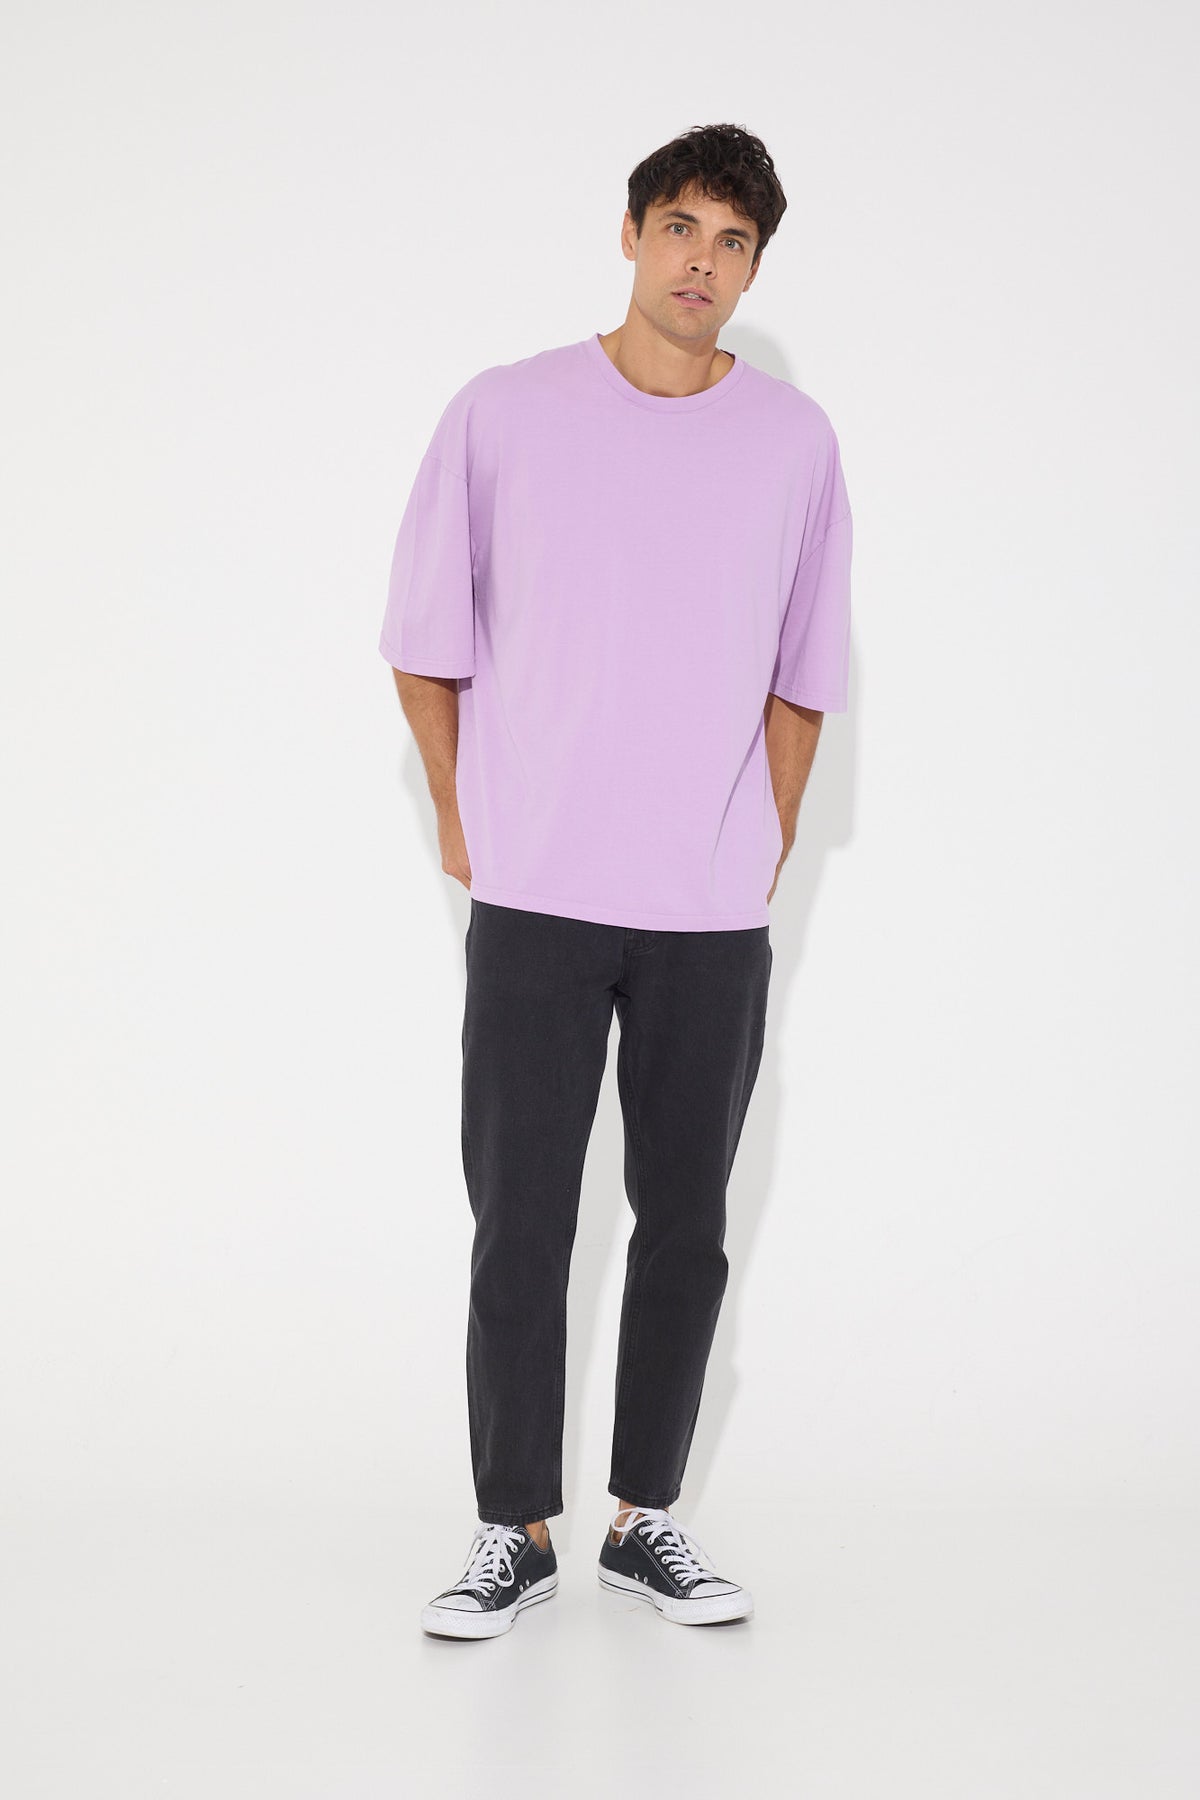 Jayden Relaxed Tee Lilac - SALE